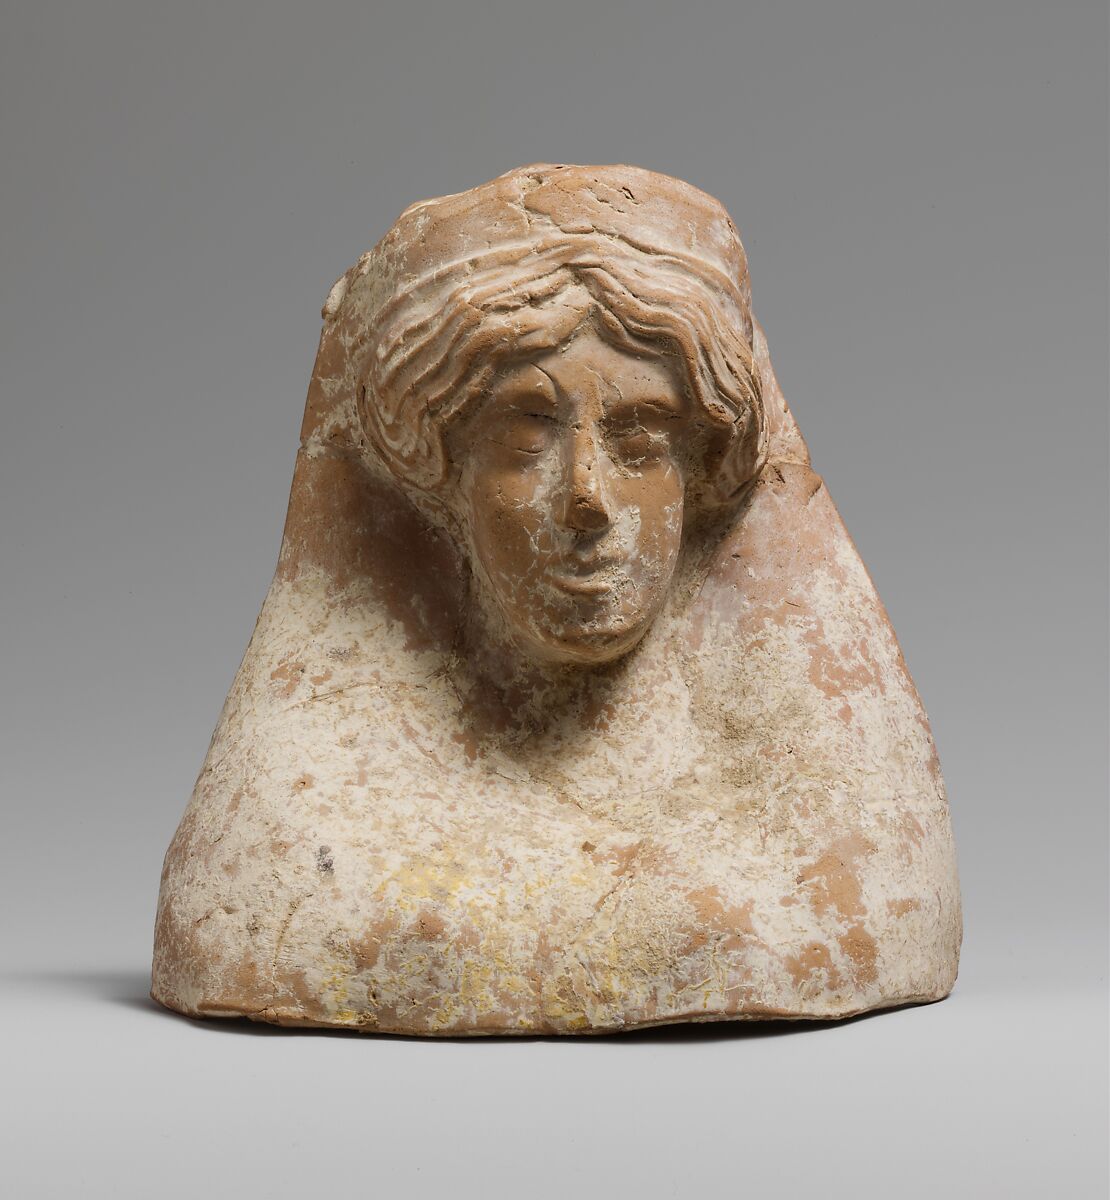 Terracotta relief with the head of a woman, Terracotta, Greek, Corinthian 